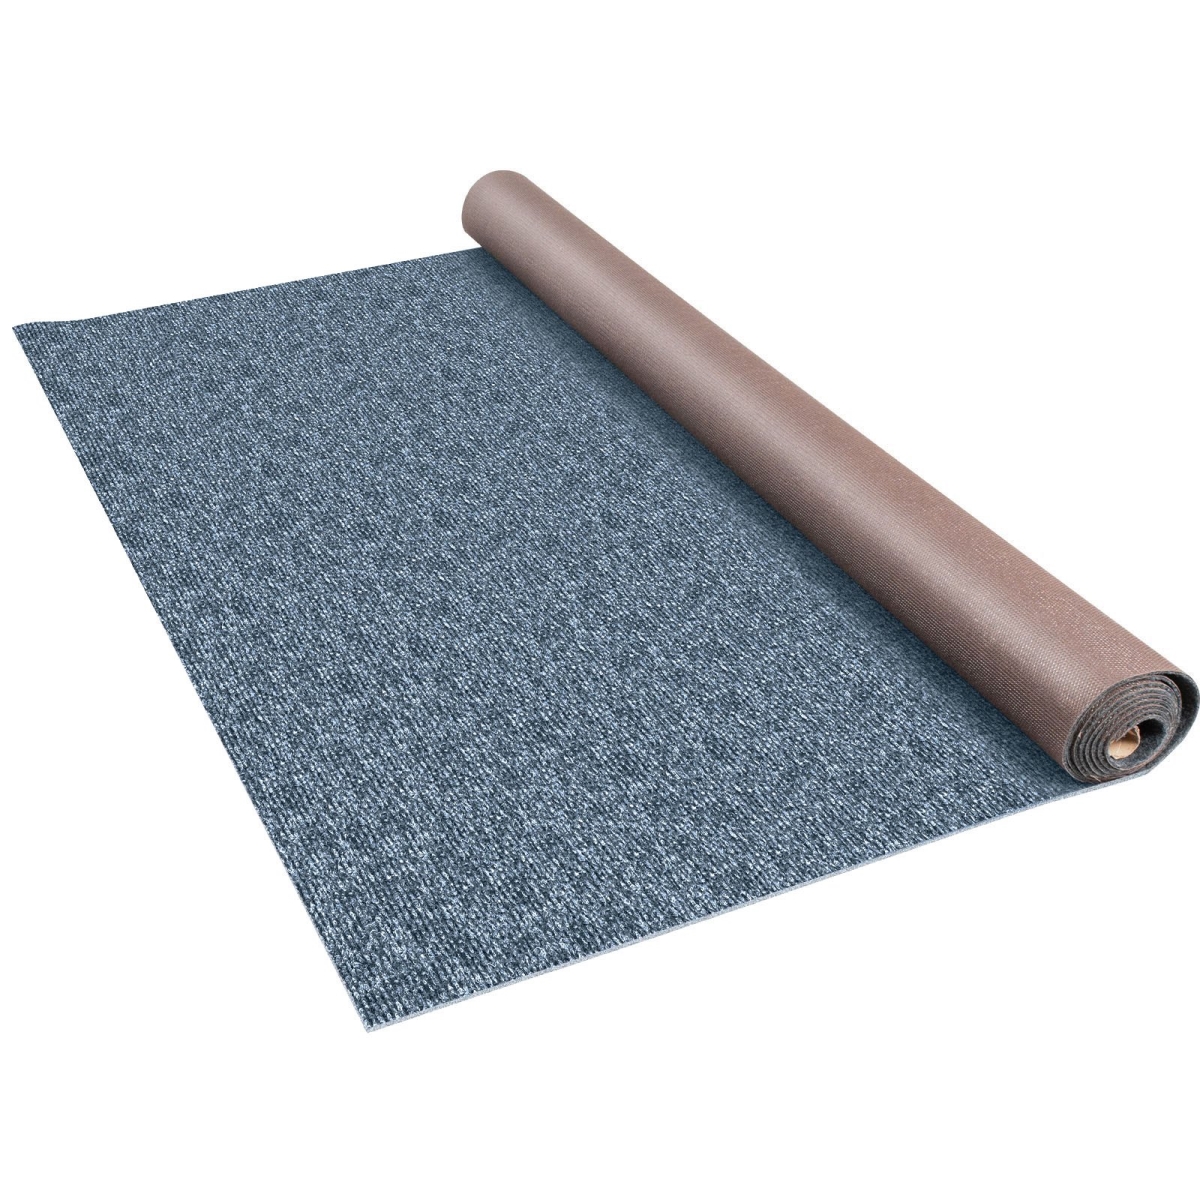 Picture of Vevor JZXWDTHS1.8X11M01V0 6 x 36 ft. Gray Marine Carpet for Patio Deck Anti-Slide TPR Water-Proof Back Outdoor Marine Carpeting Outdoor Carpet